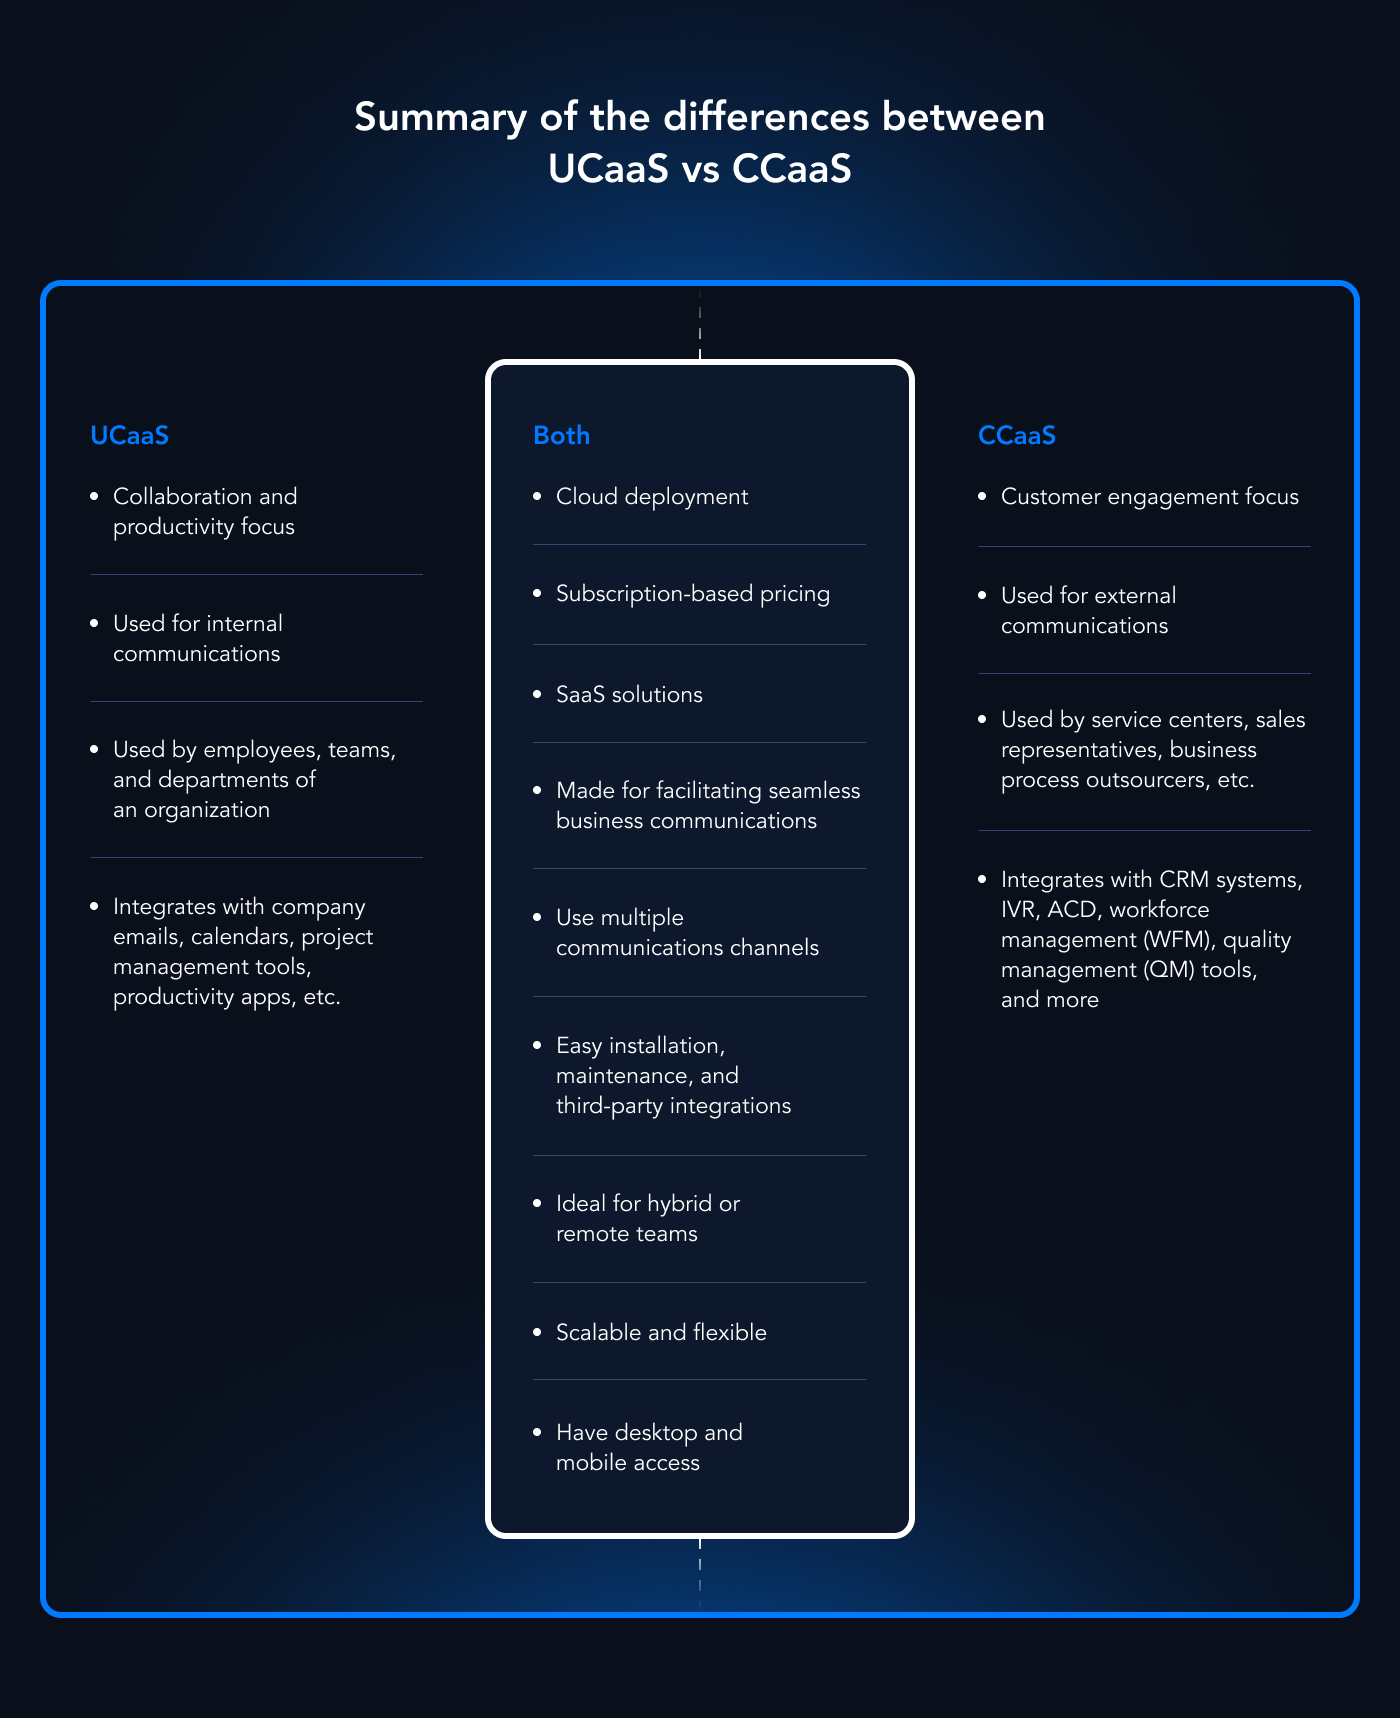 Visual summary of the differences between UCaaS and CCaaS